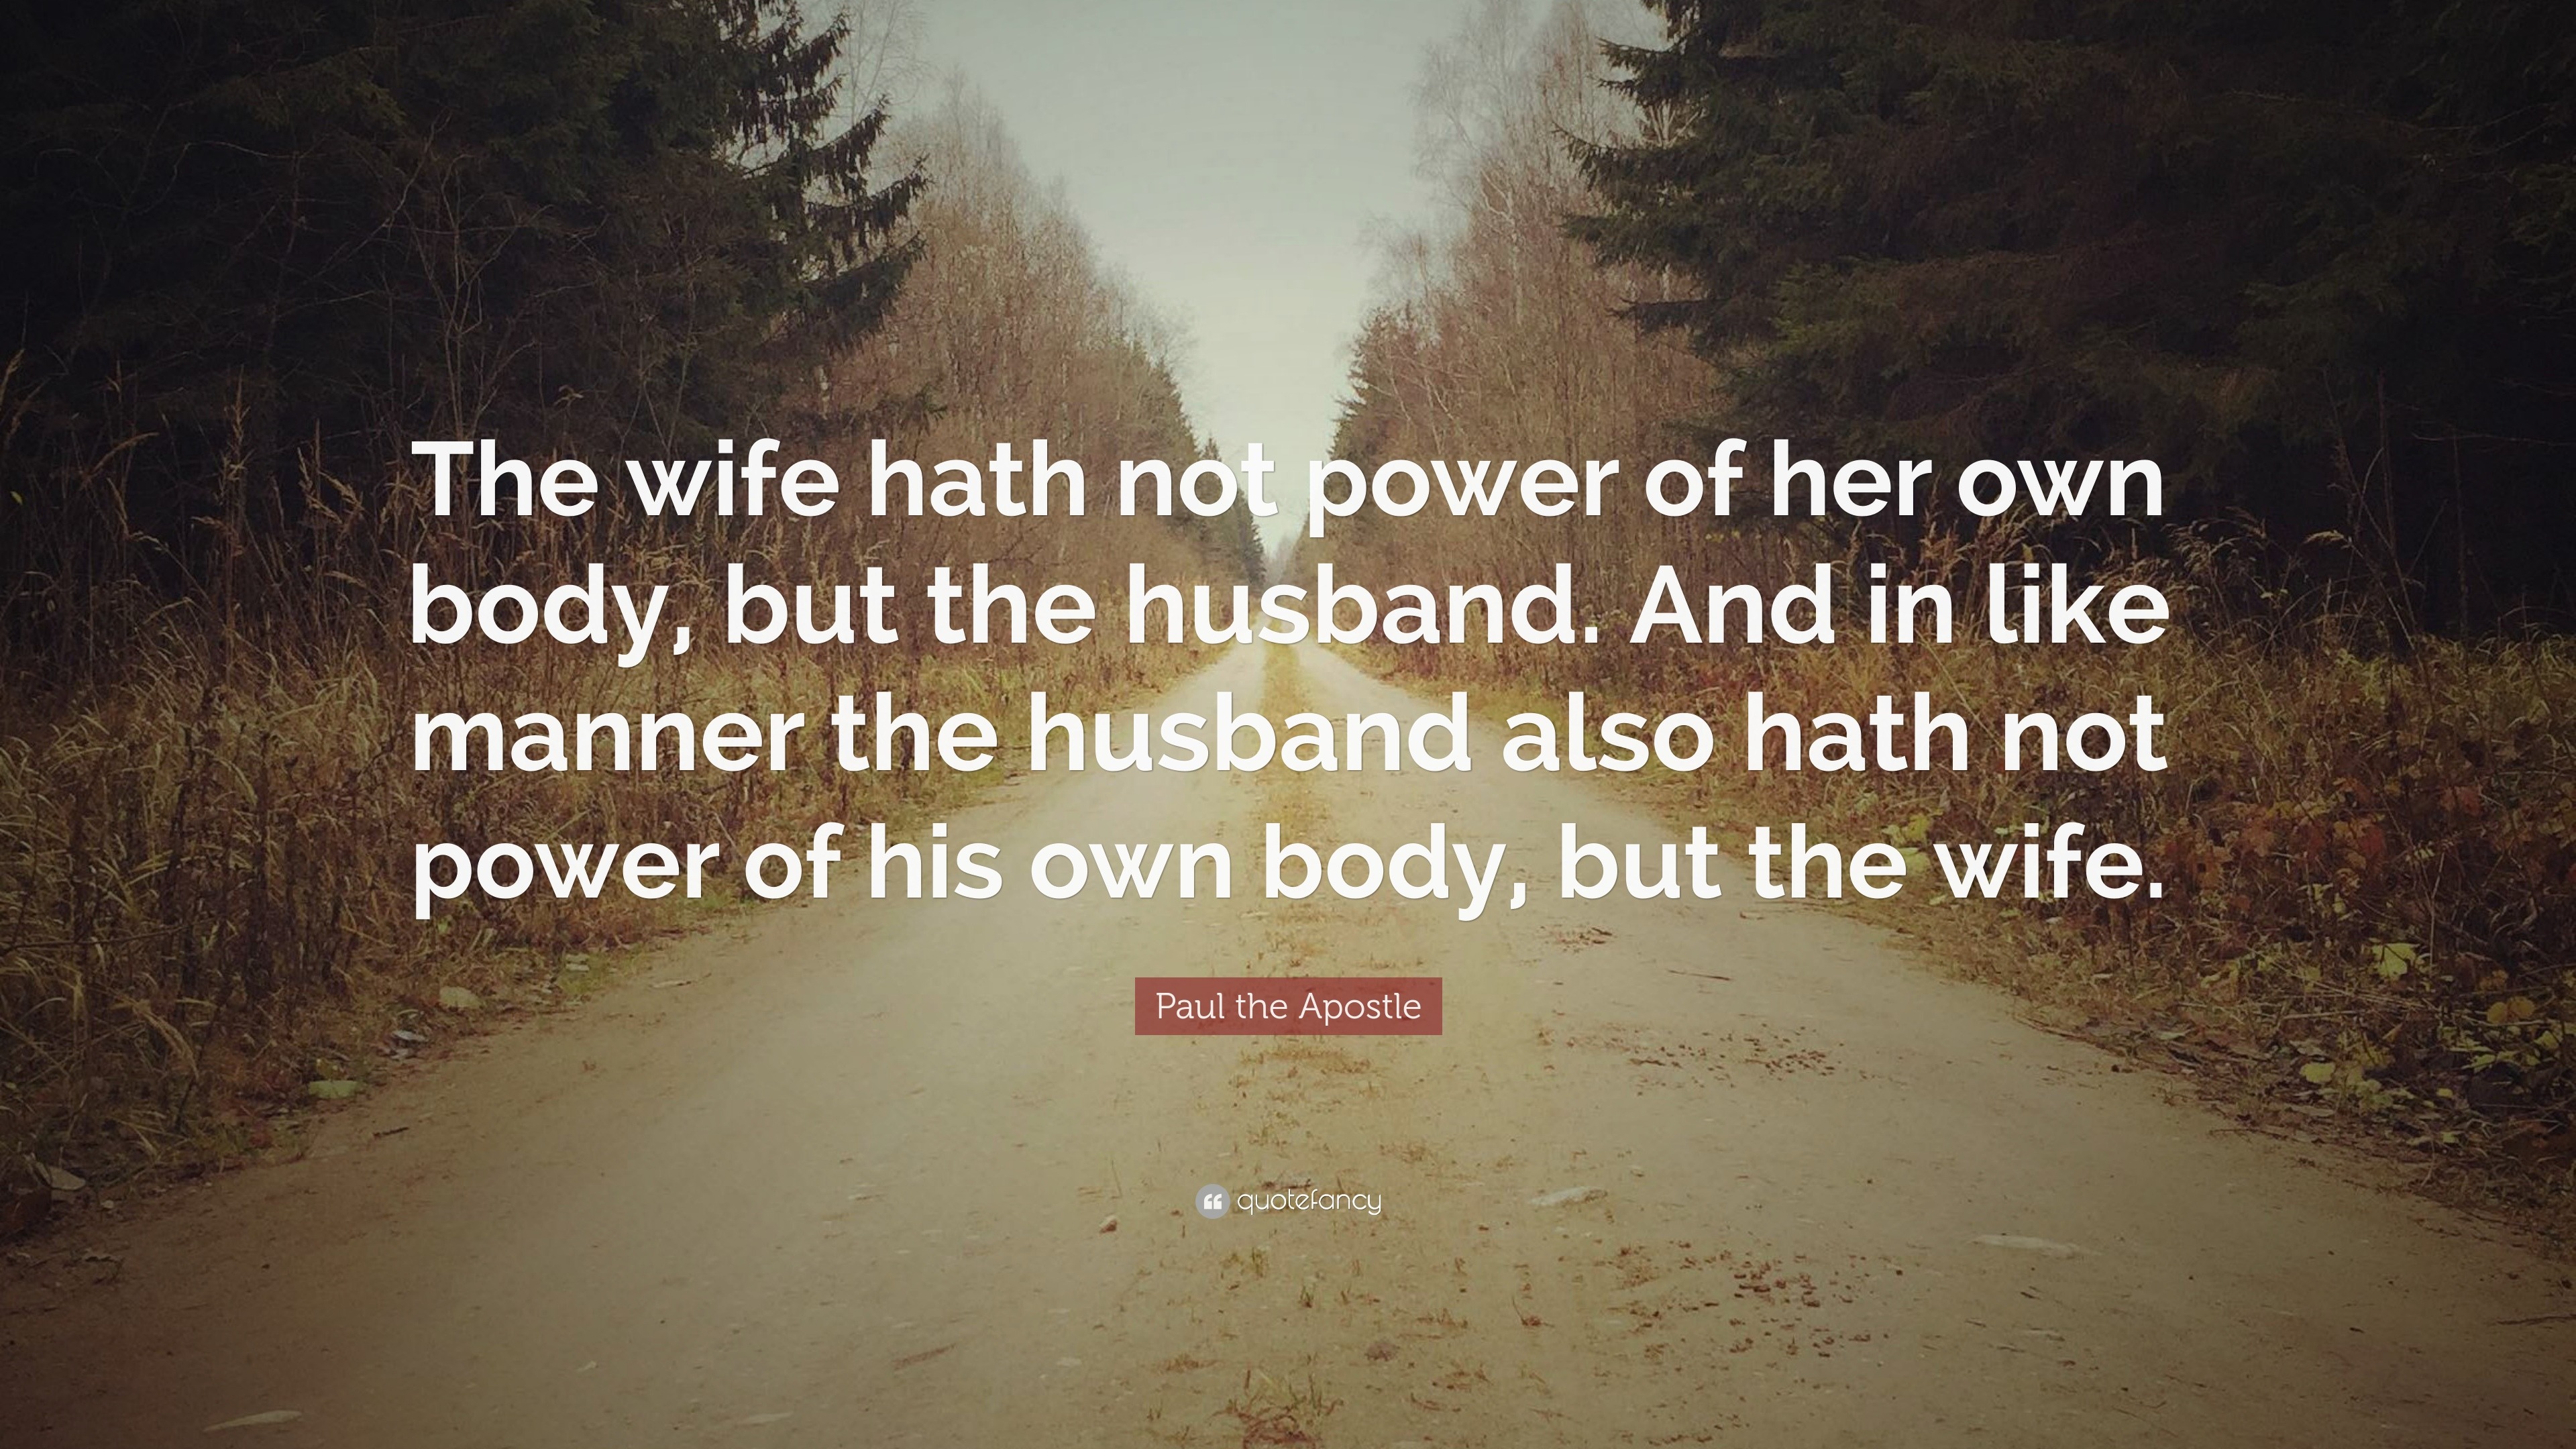 Paul the Apostle Quote: “The wife hath not power of her own body, but ...